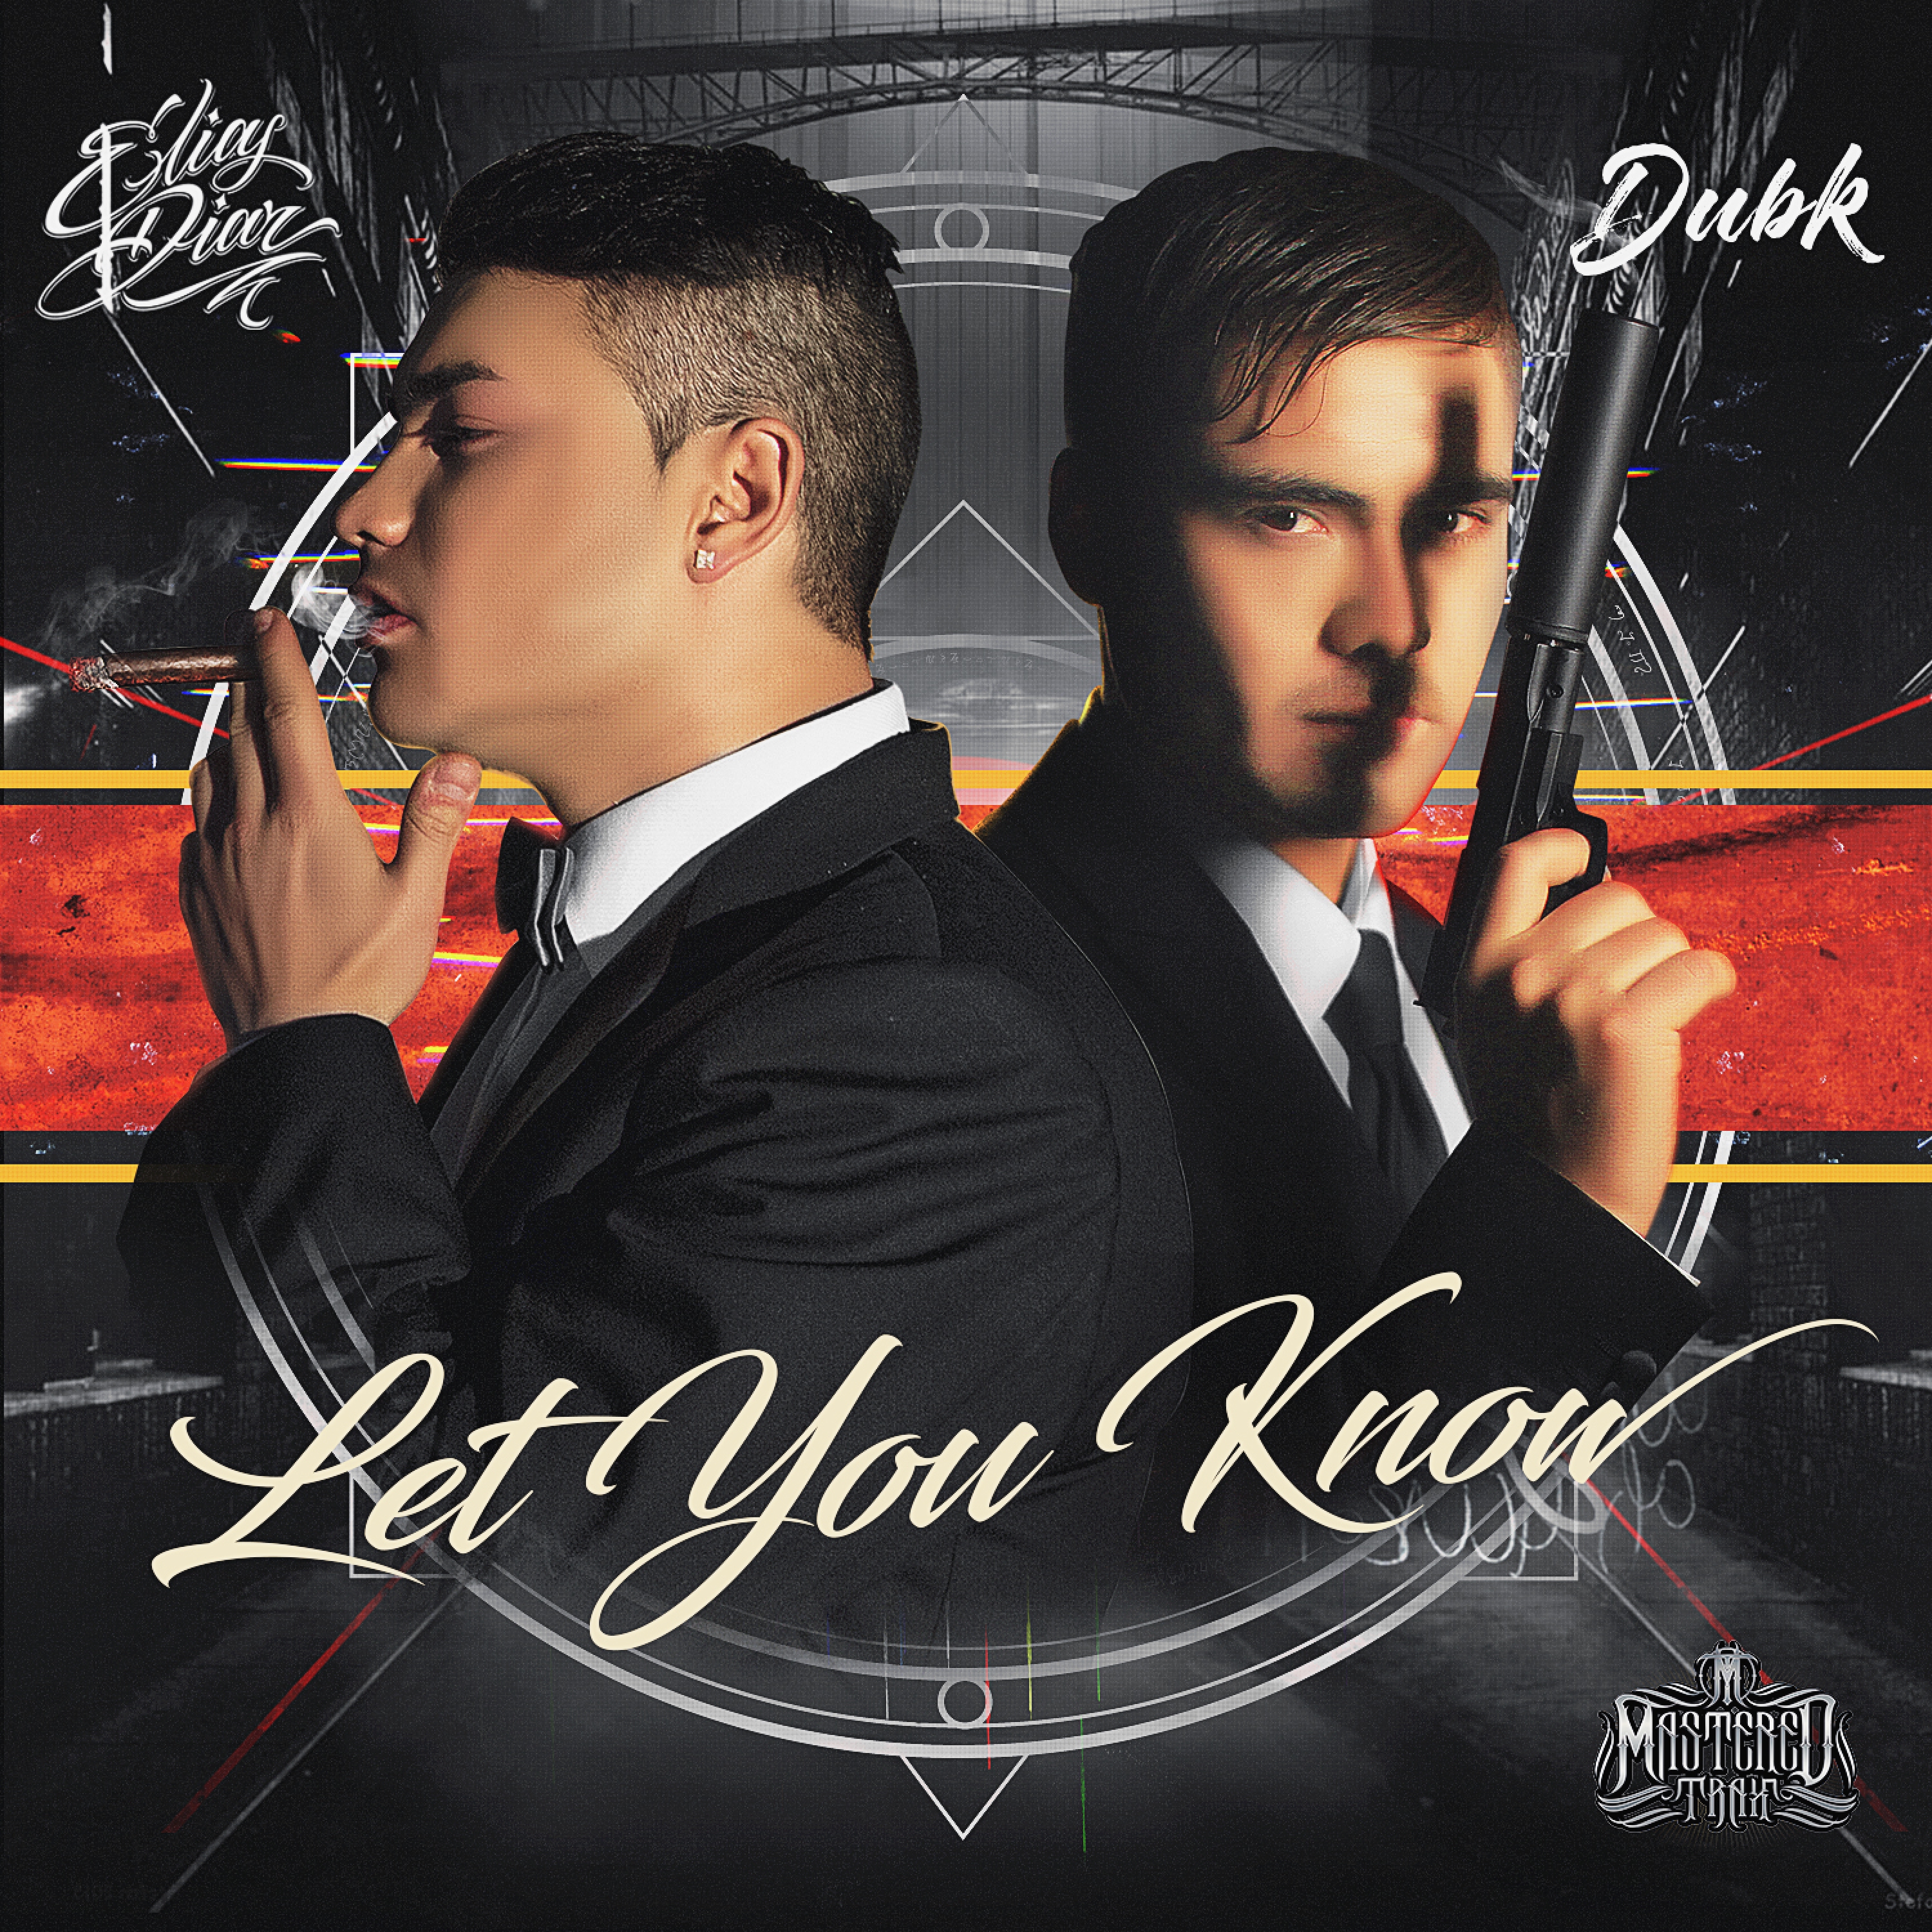 Let You Know (feat. DubK)